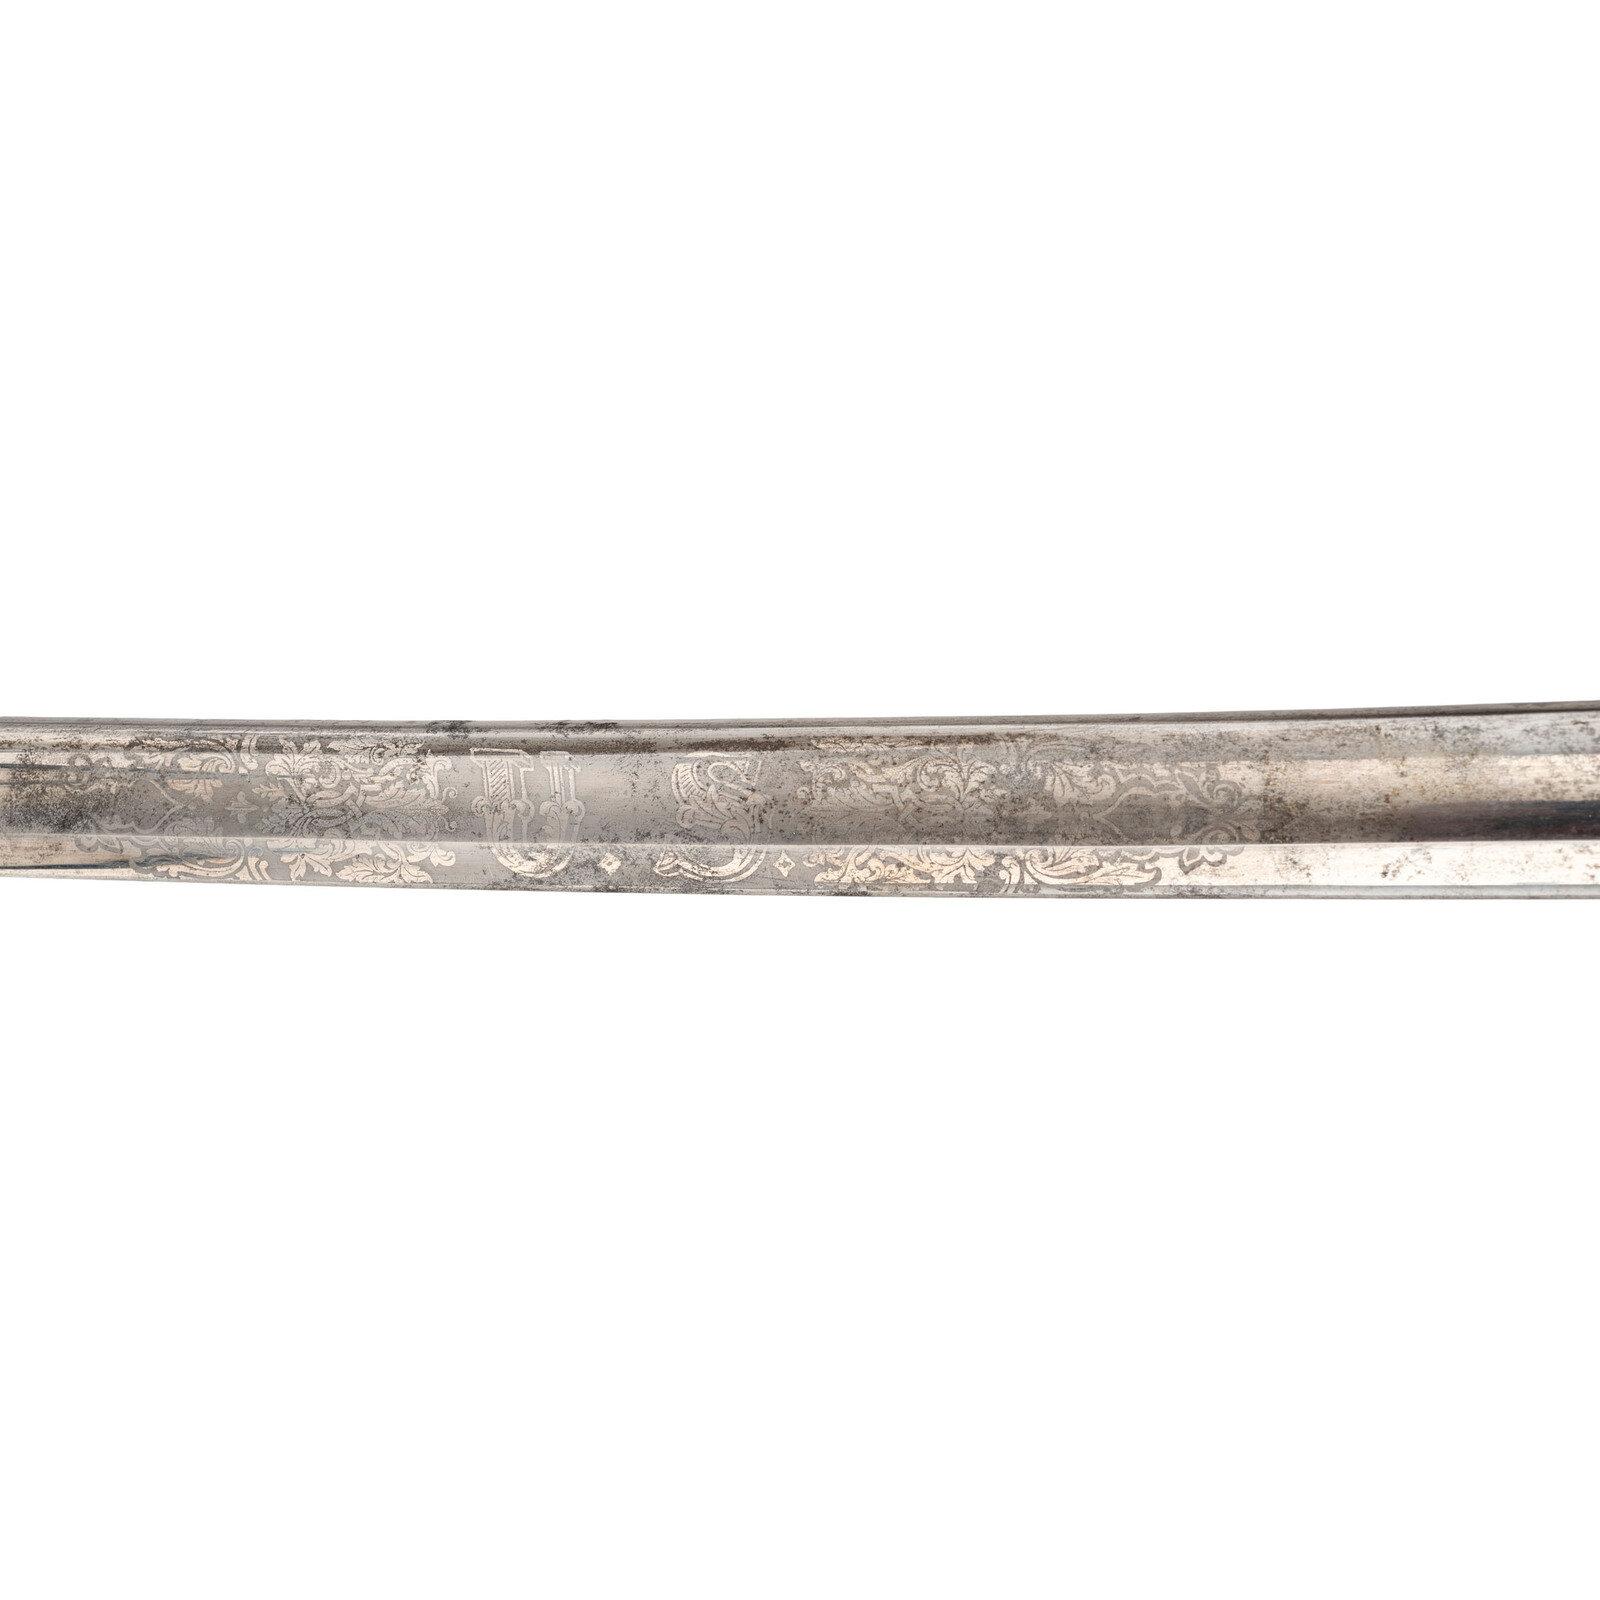 Imported Foot Officer's Sword Presented to Maj. (Col.) James A. Lane - WIA at Gettysburg